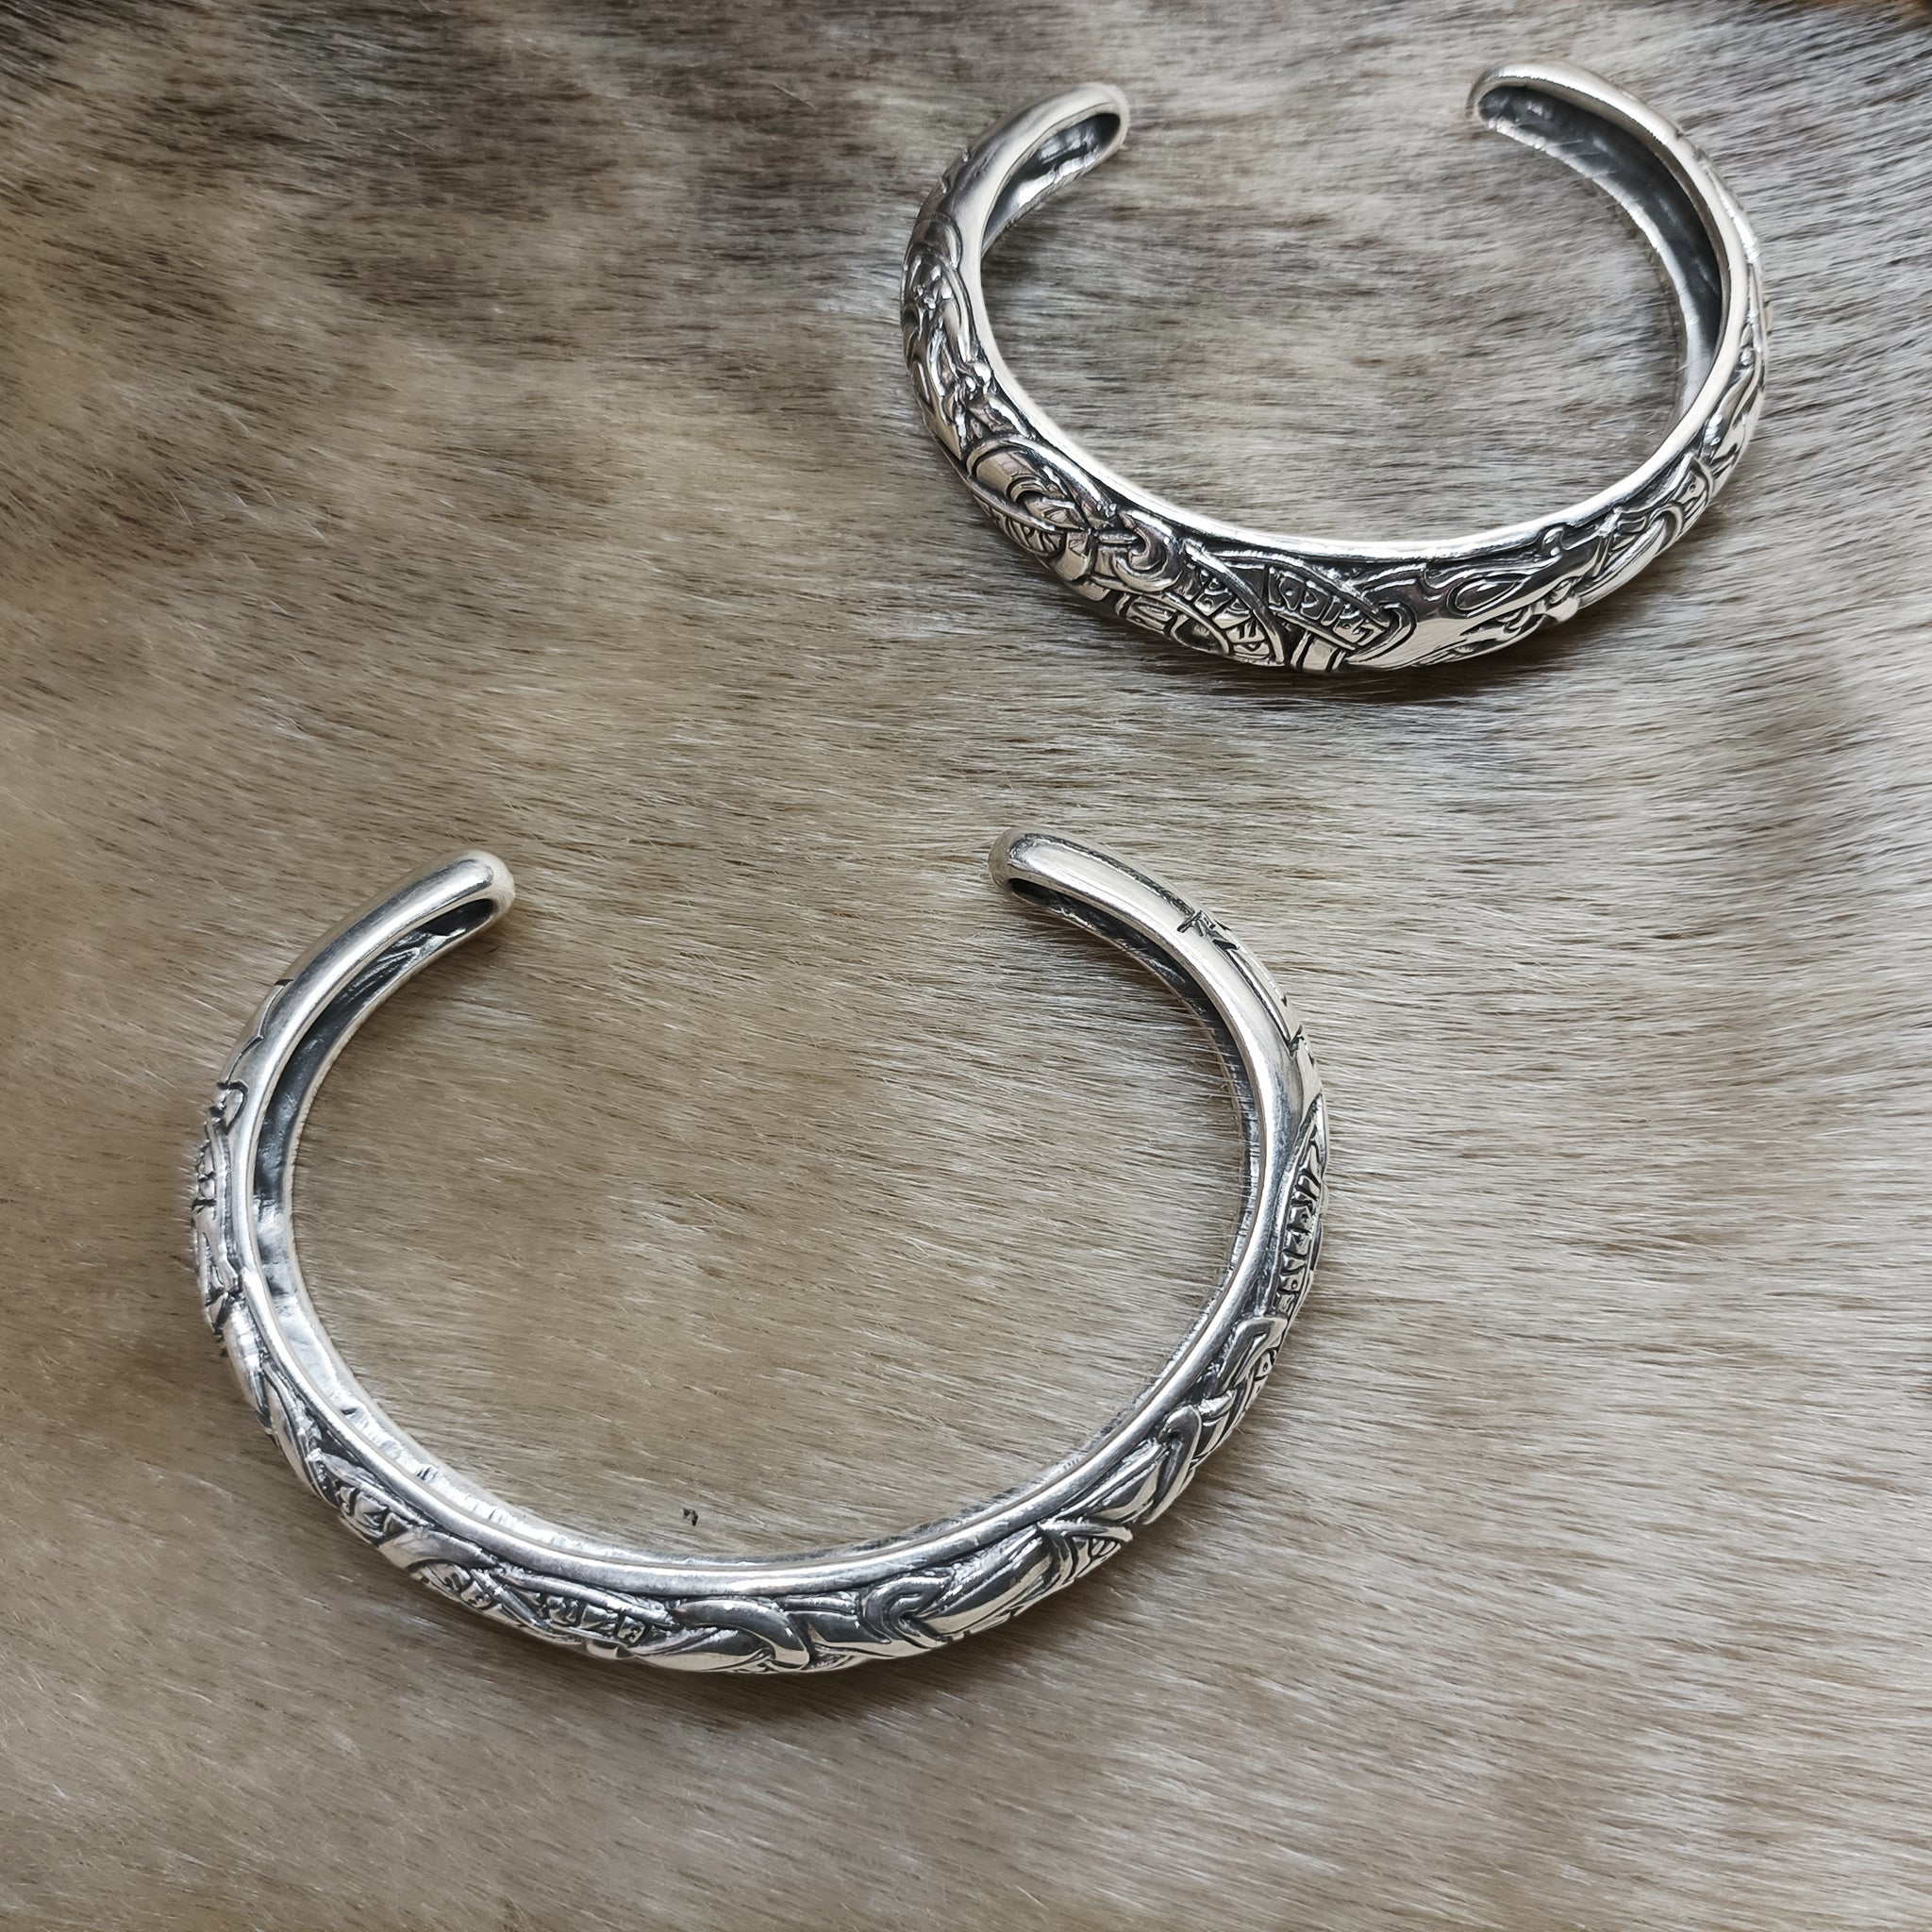 Silver Runic Viking Bracelets / Arm Rings on Fur - Size Comparisons